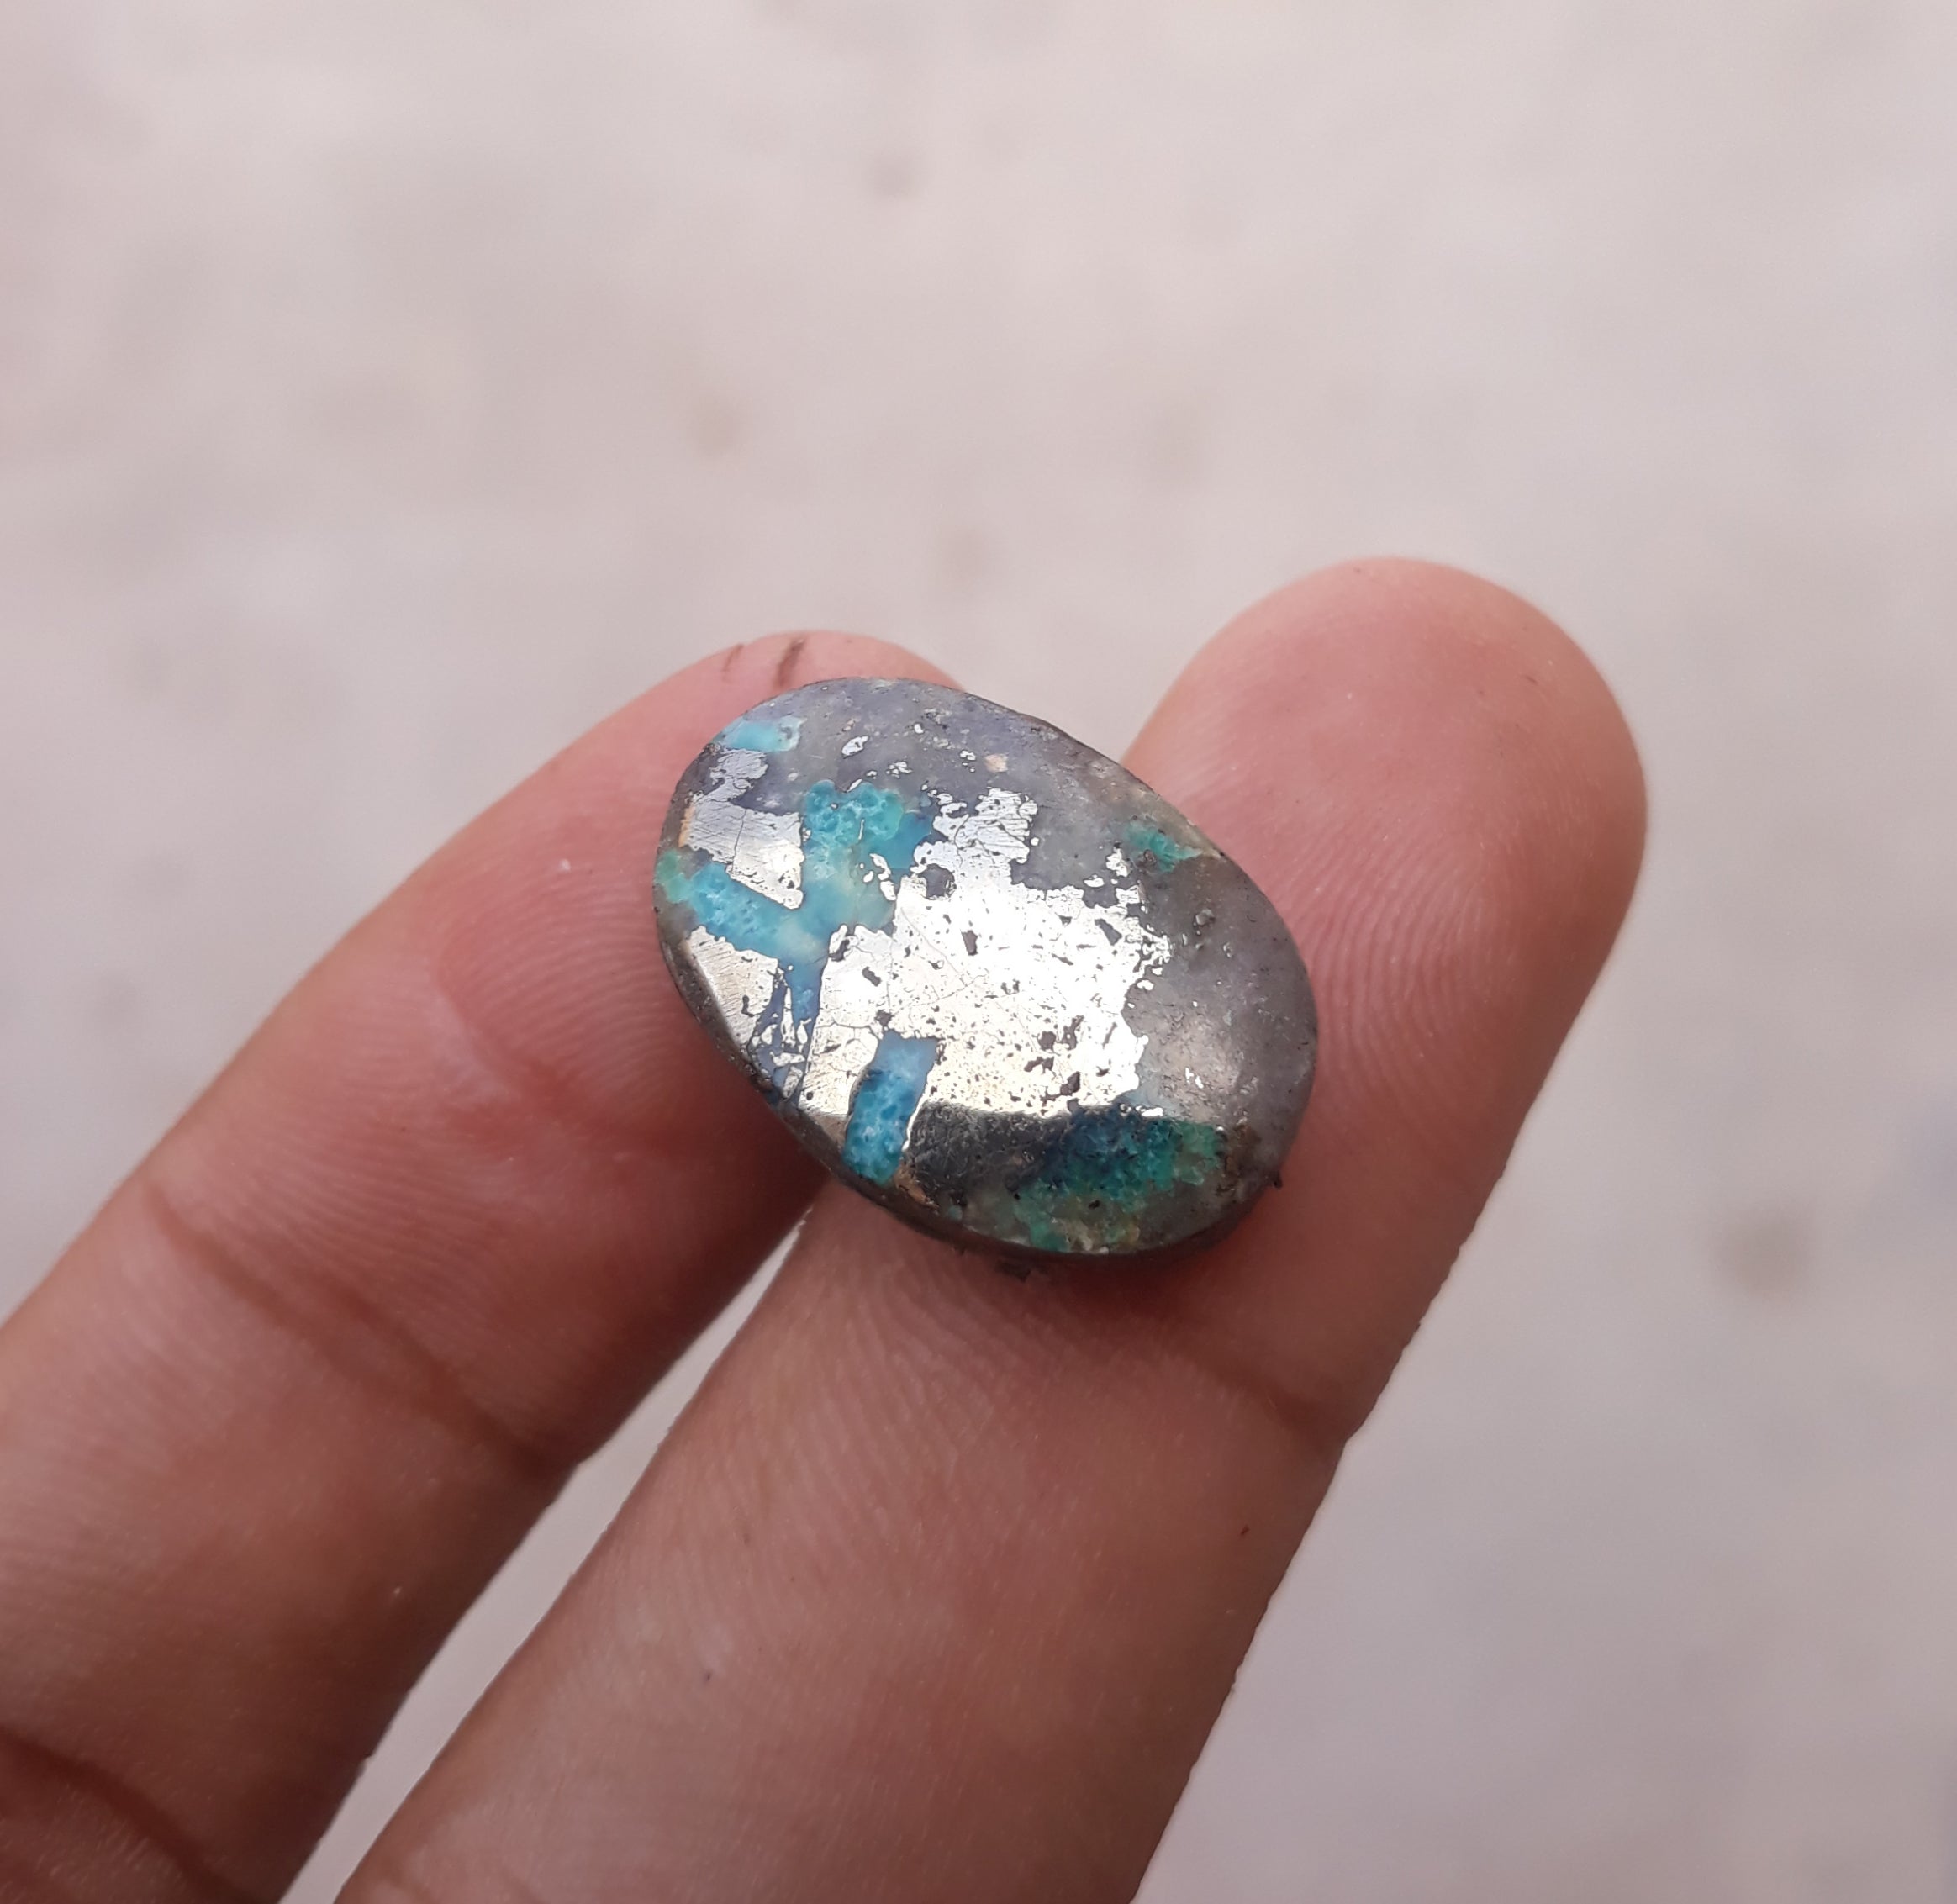 16.3ct Morenci Turquoise - Natural Certified Turquoise with Pyrite - Blue Matrix Turquoise - Shajri Feroza - 20x14mm